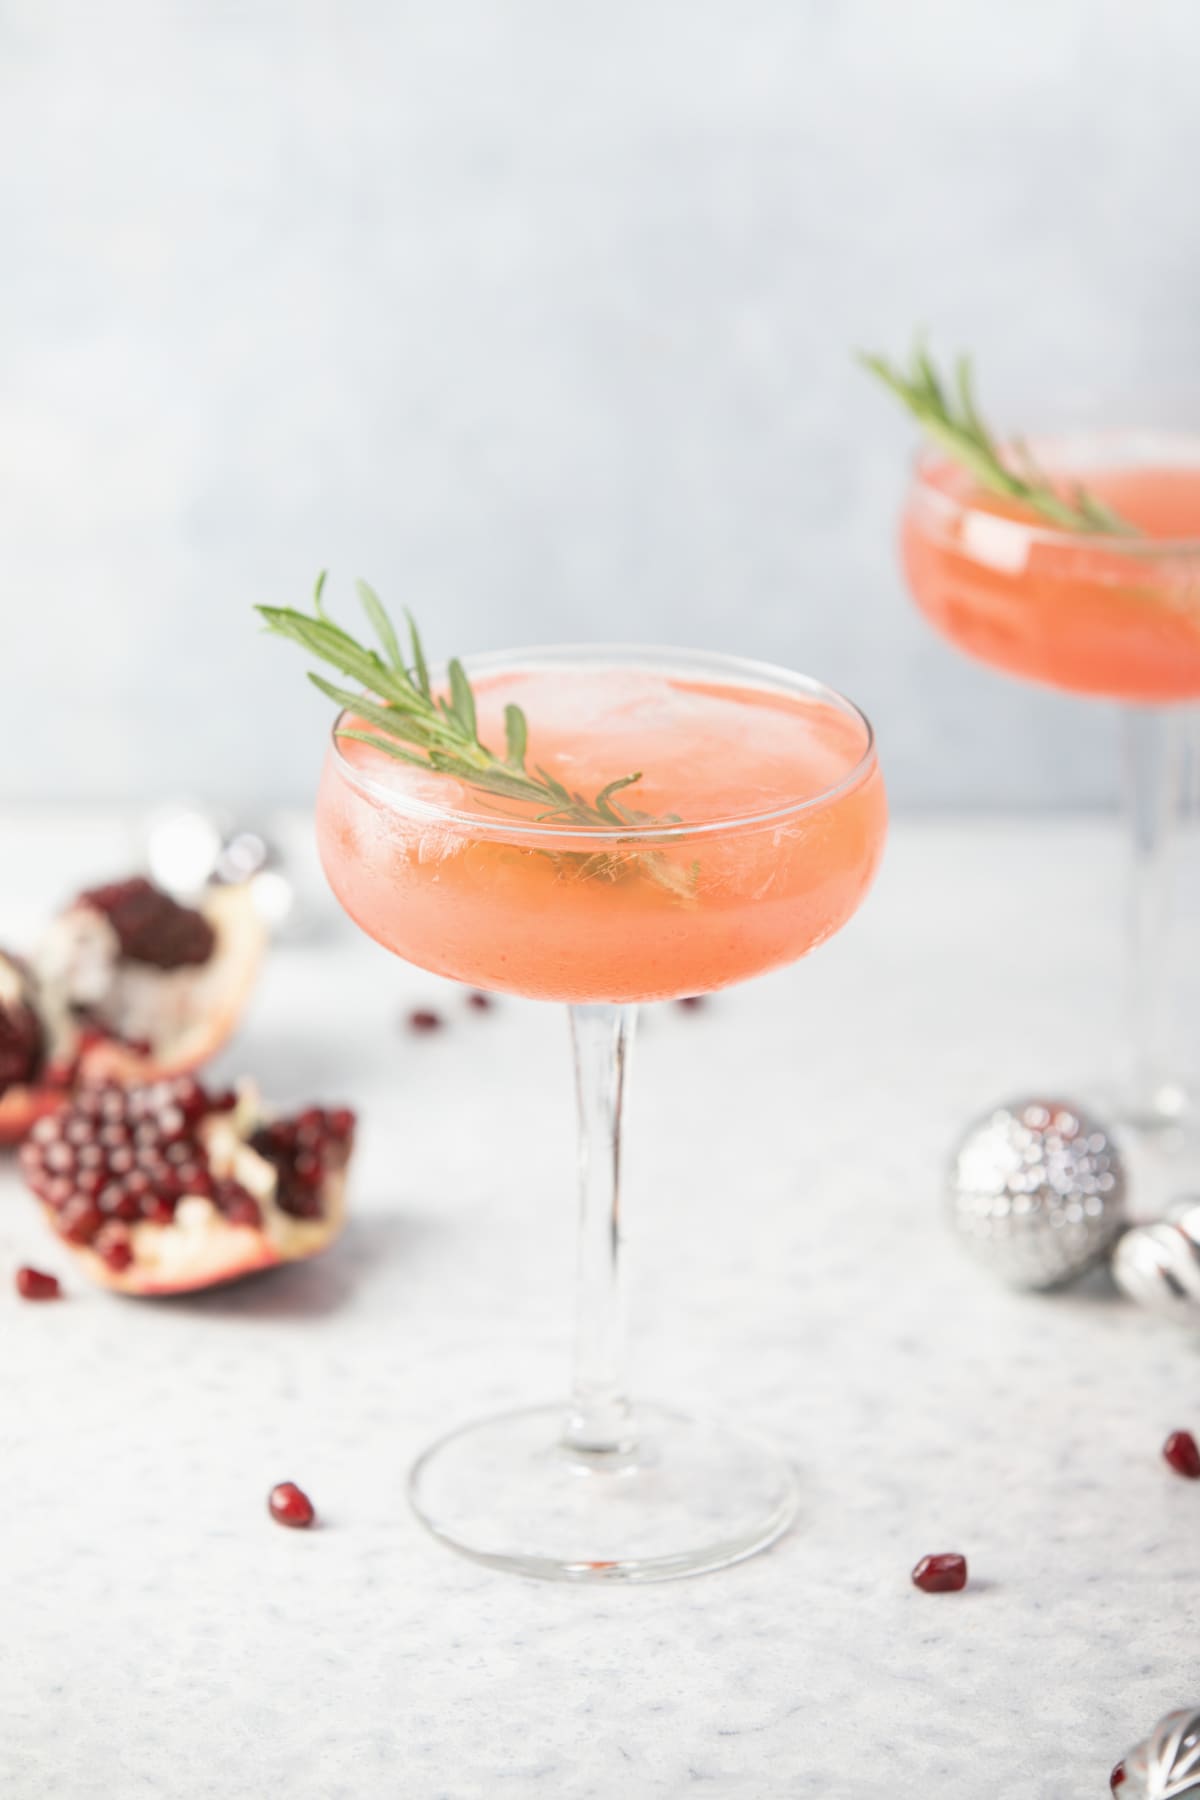 Winter holidays festive alcohol pomegranate drink concept, front view